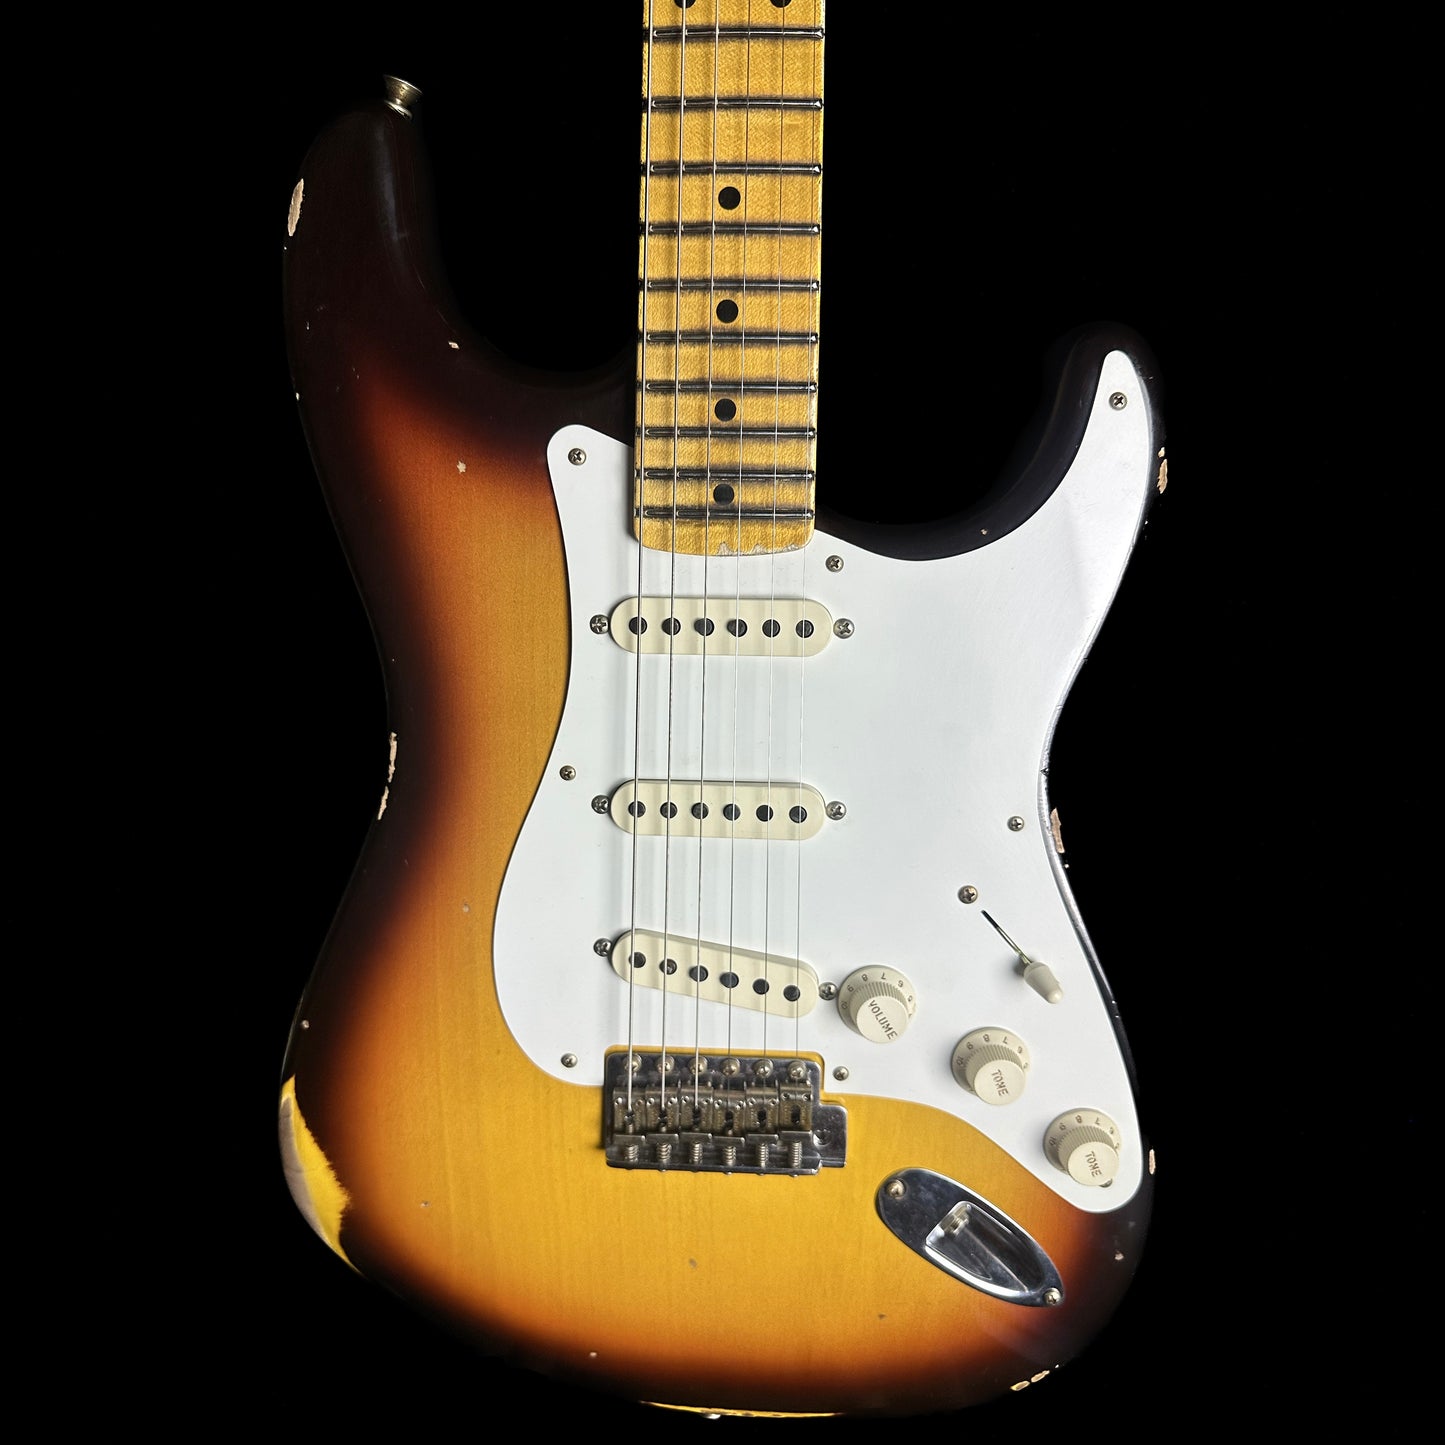 Front of Fender Custom Shop 58 Strat Relic Faded Aged Chocolate 3-color Sunburst.